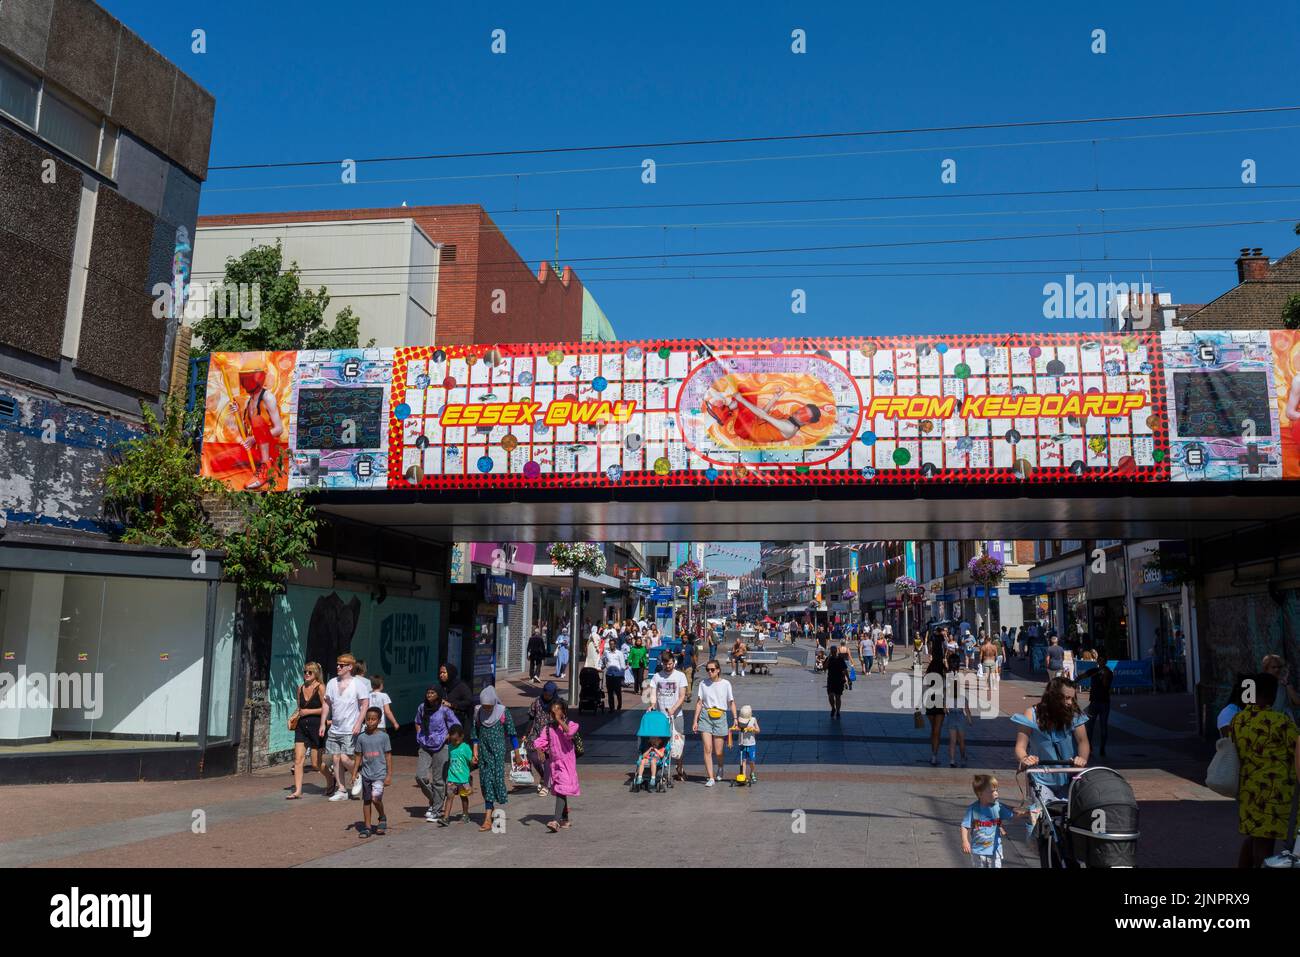 Colourful artwork on railway bridge over the High Street of Southend on Sea, Essex, UK. Families heading towards the beaches. Essex @way from keyboard Stock Photo